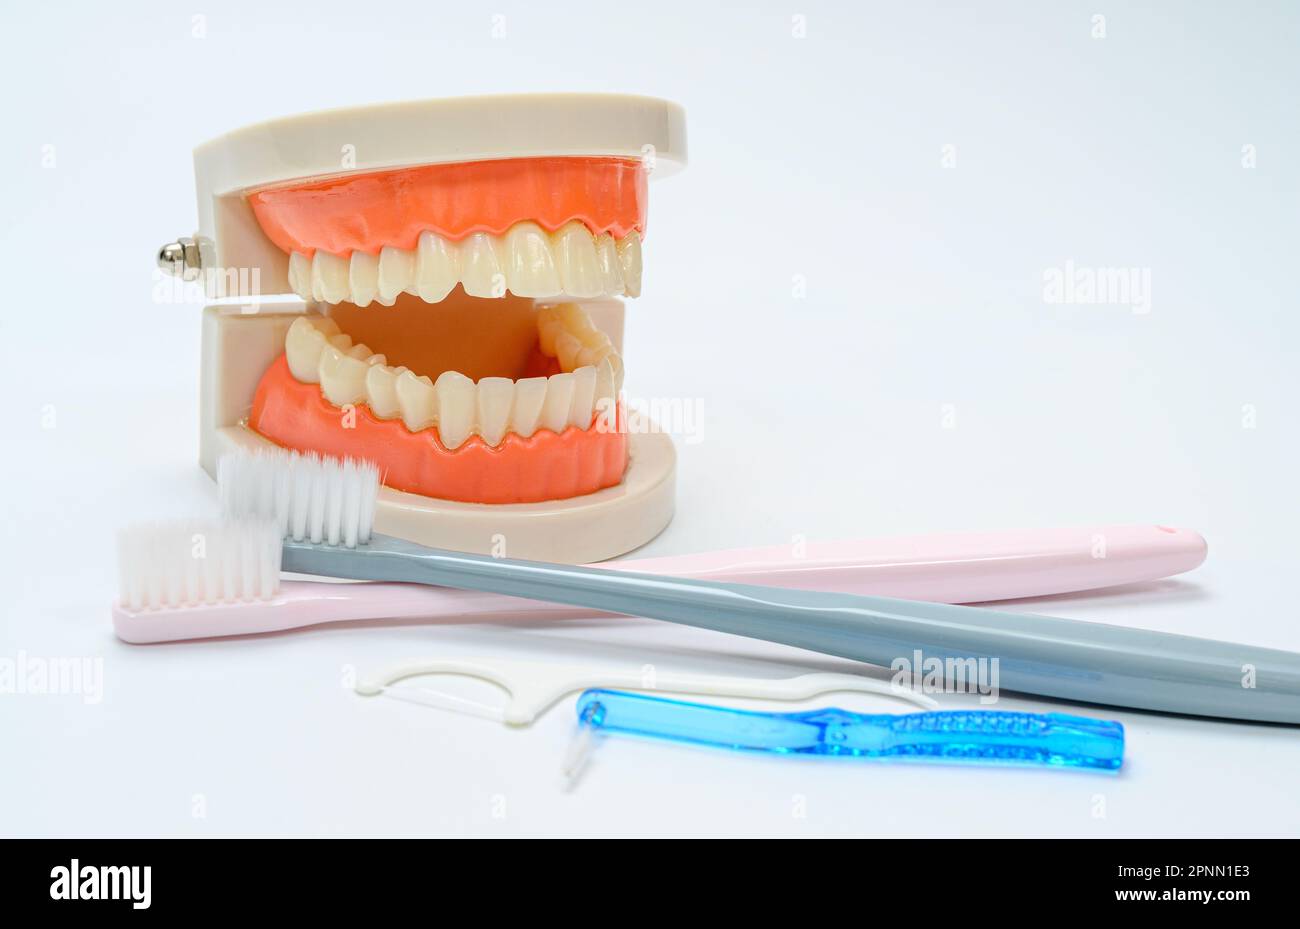 Tooth models and toothbrushes on a white background Stock Photo